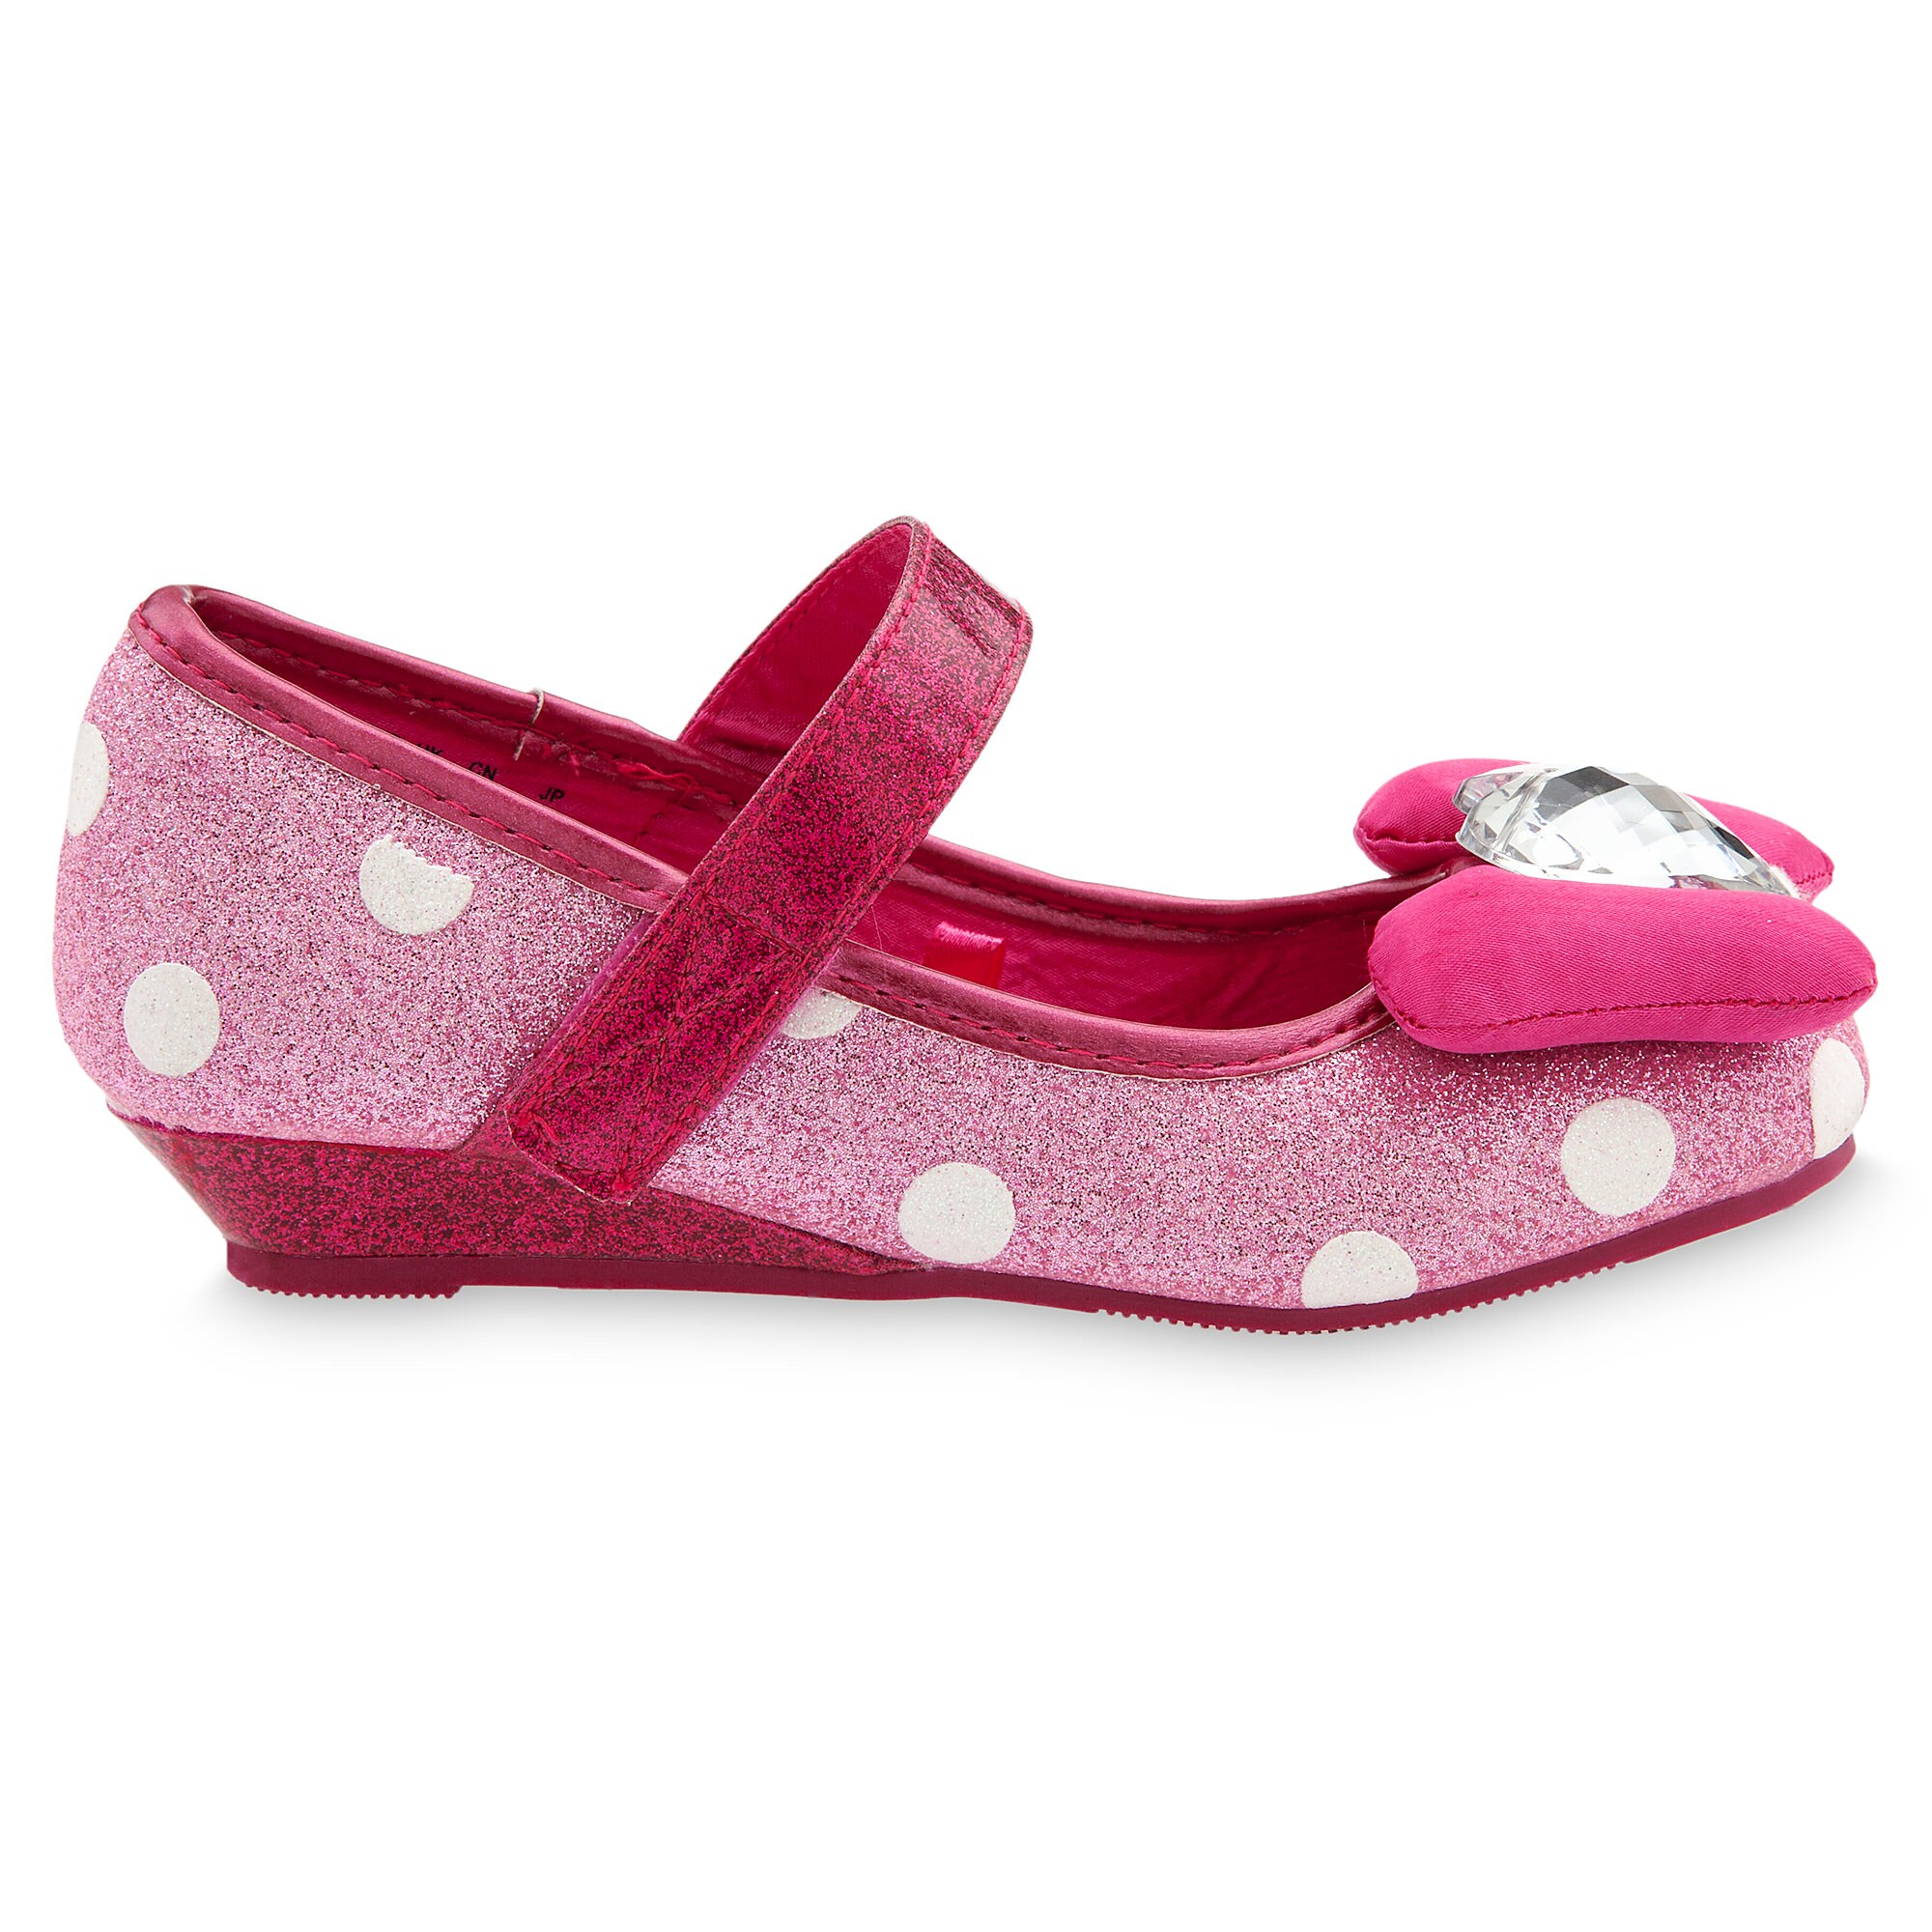 Minnie Mouse Costume Shoes for Kids - Pink